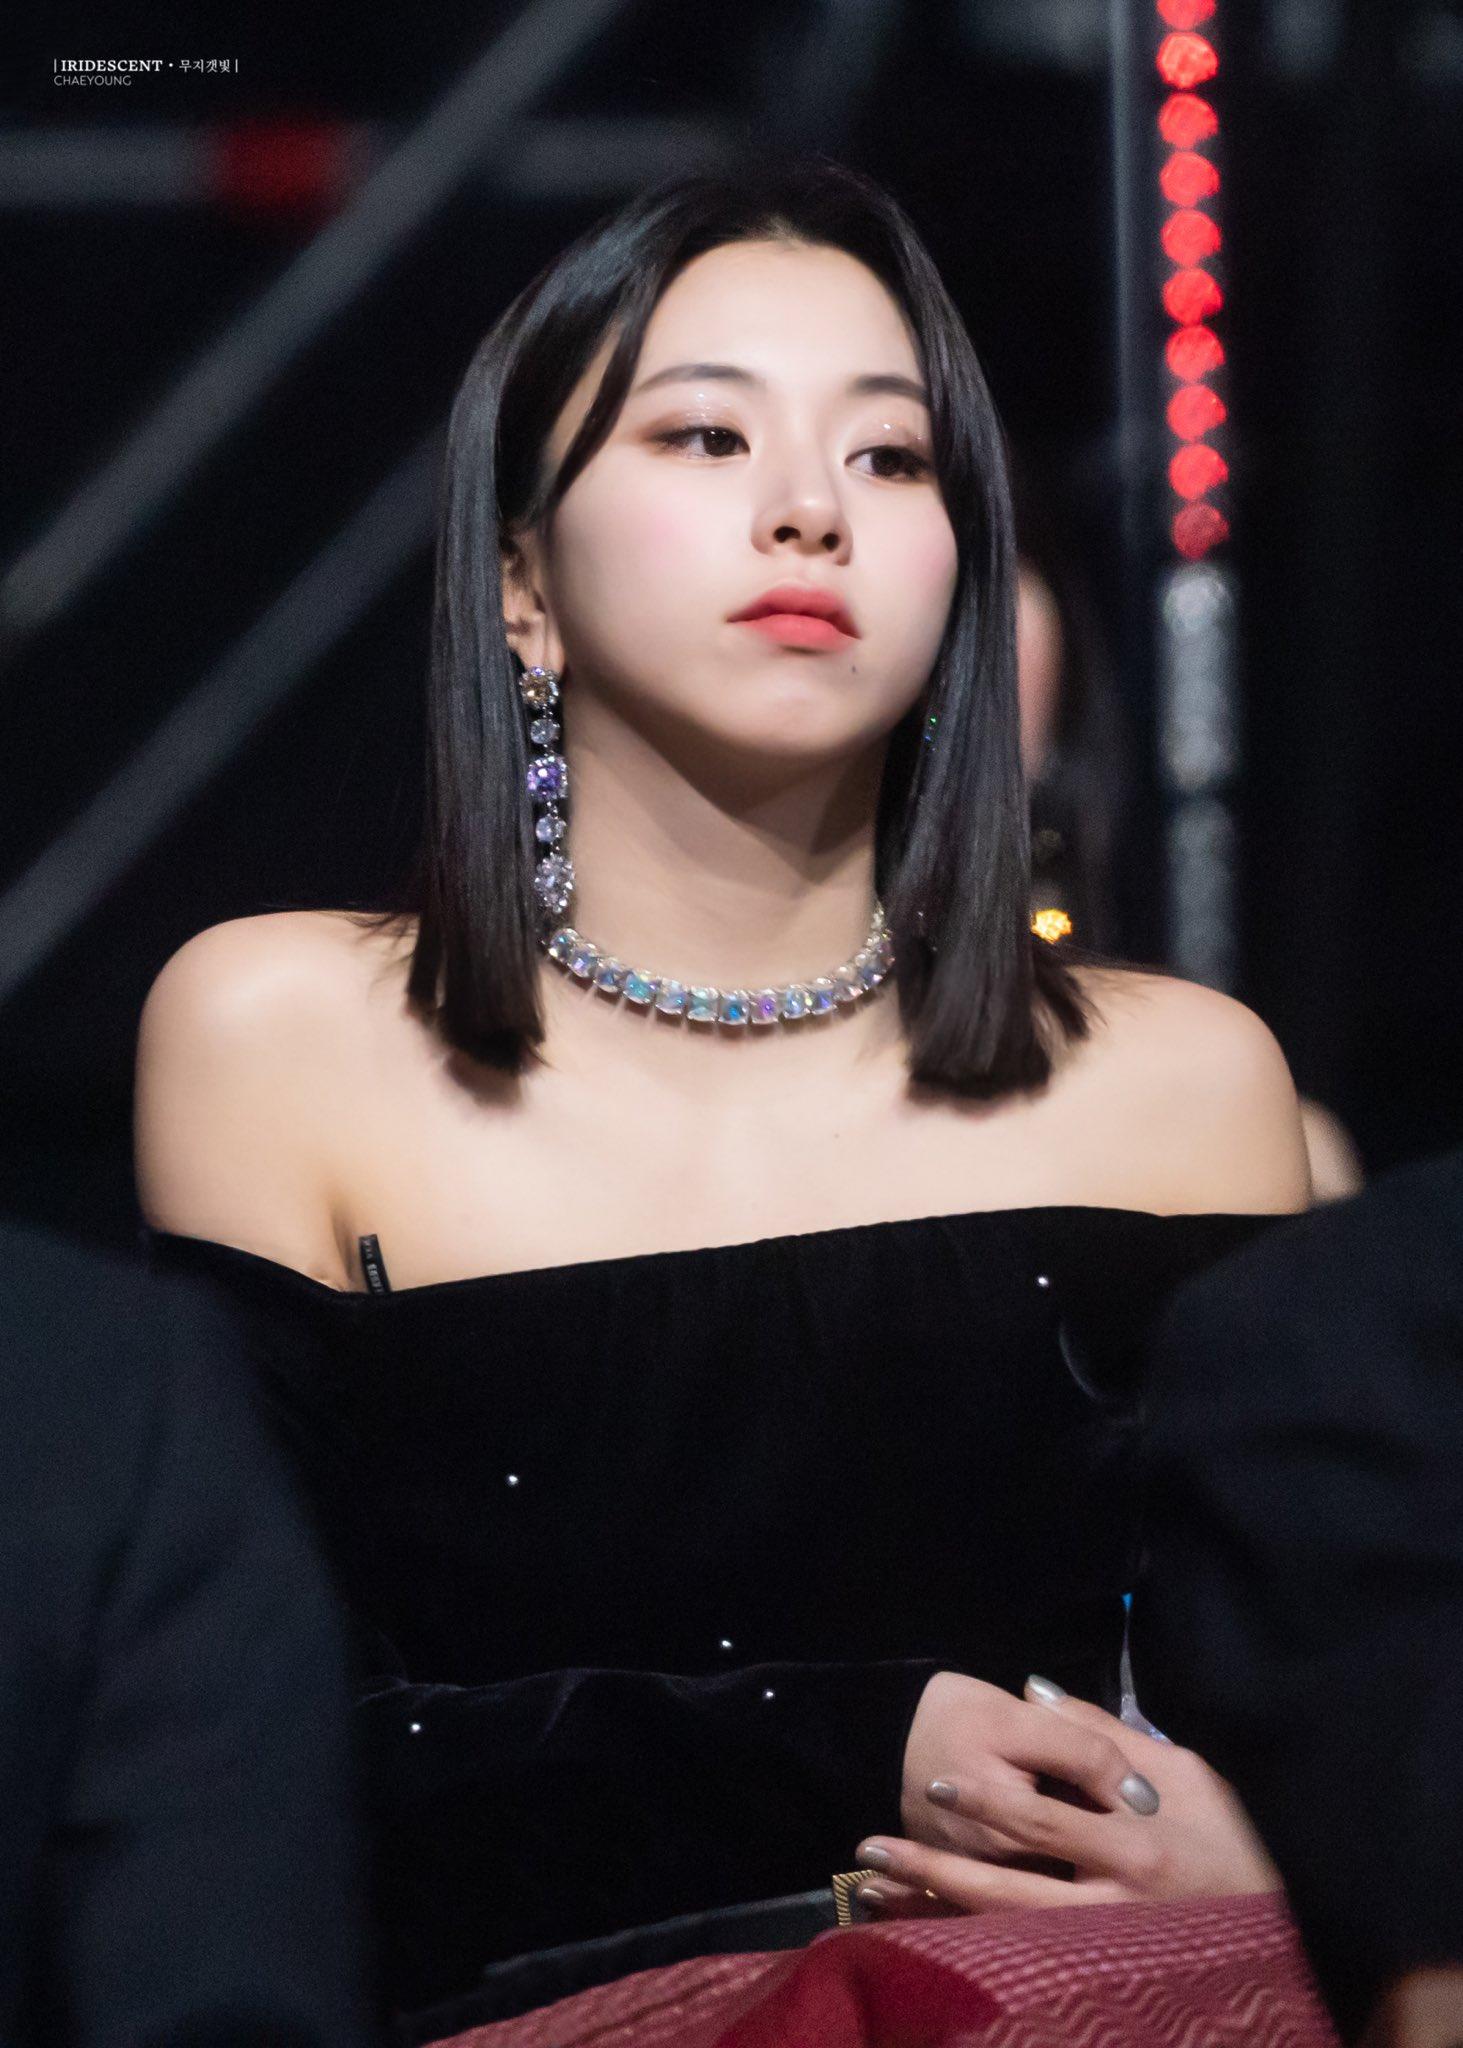 Bored Chaeyoung is so attractive